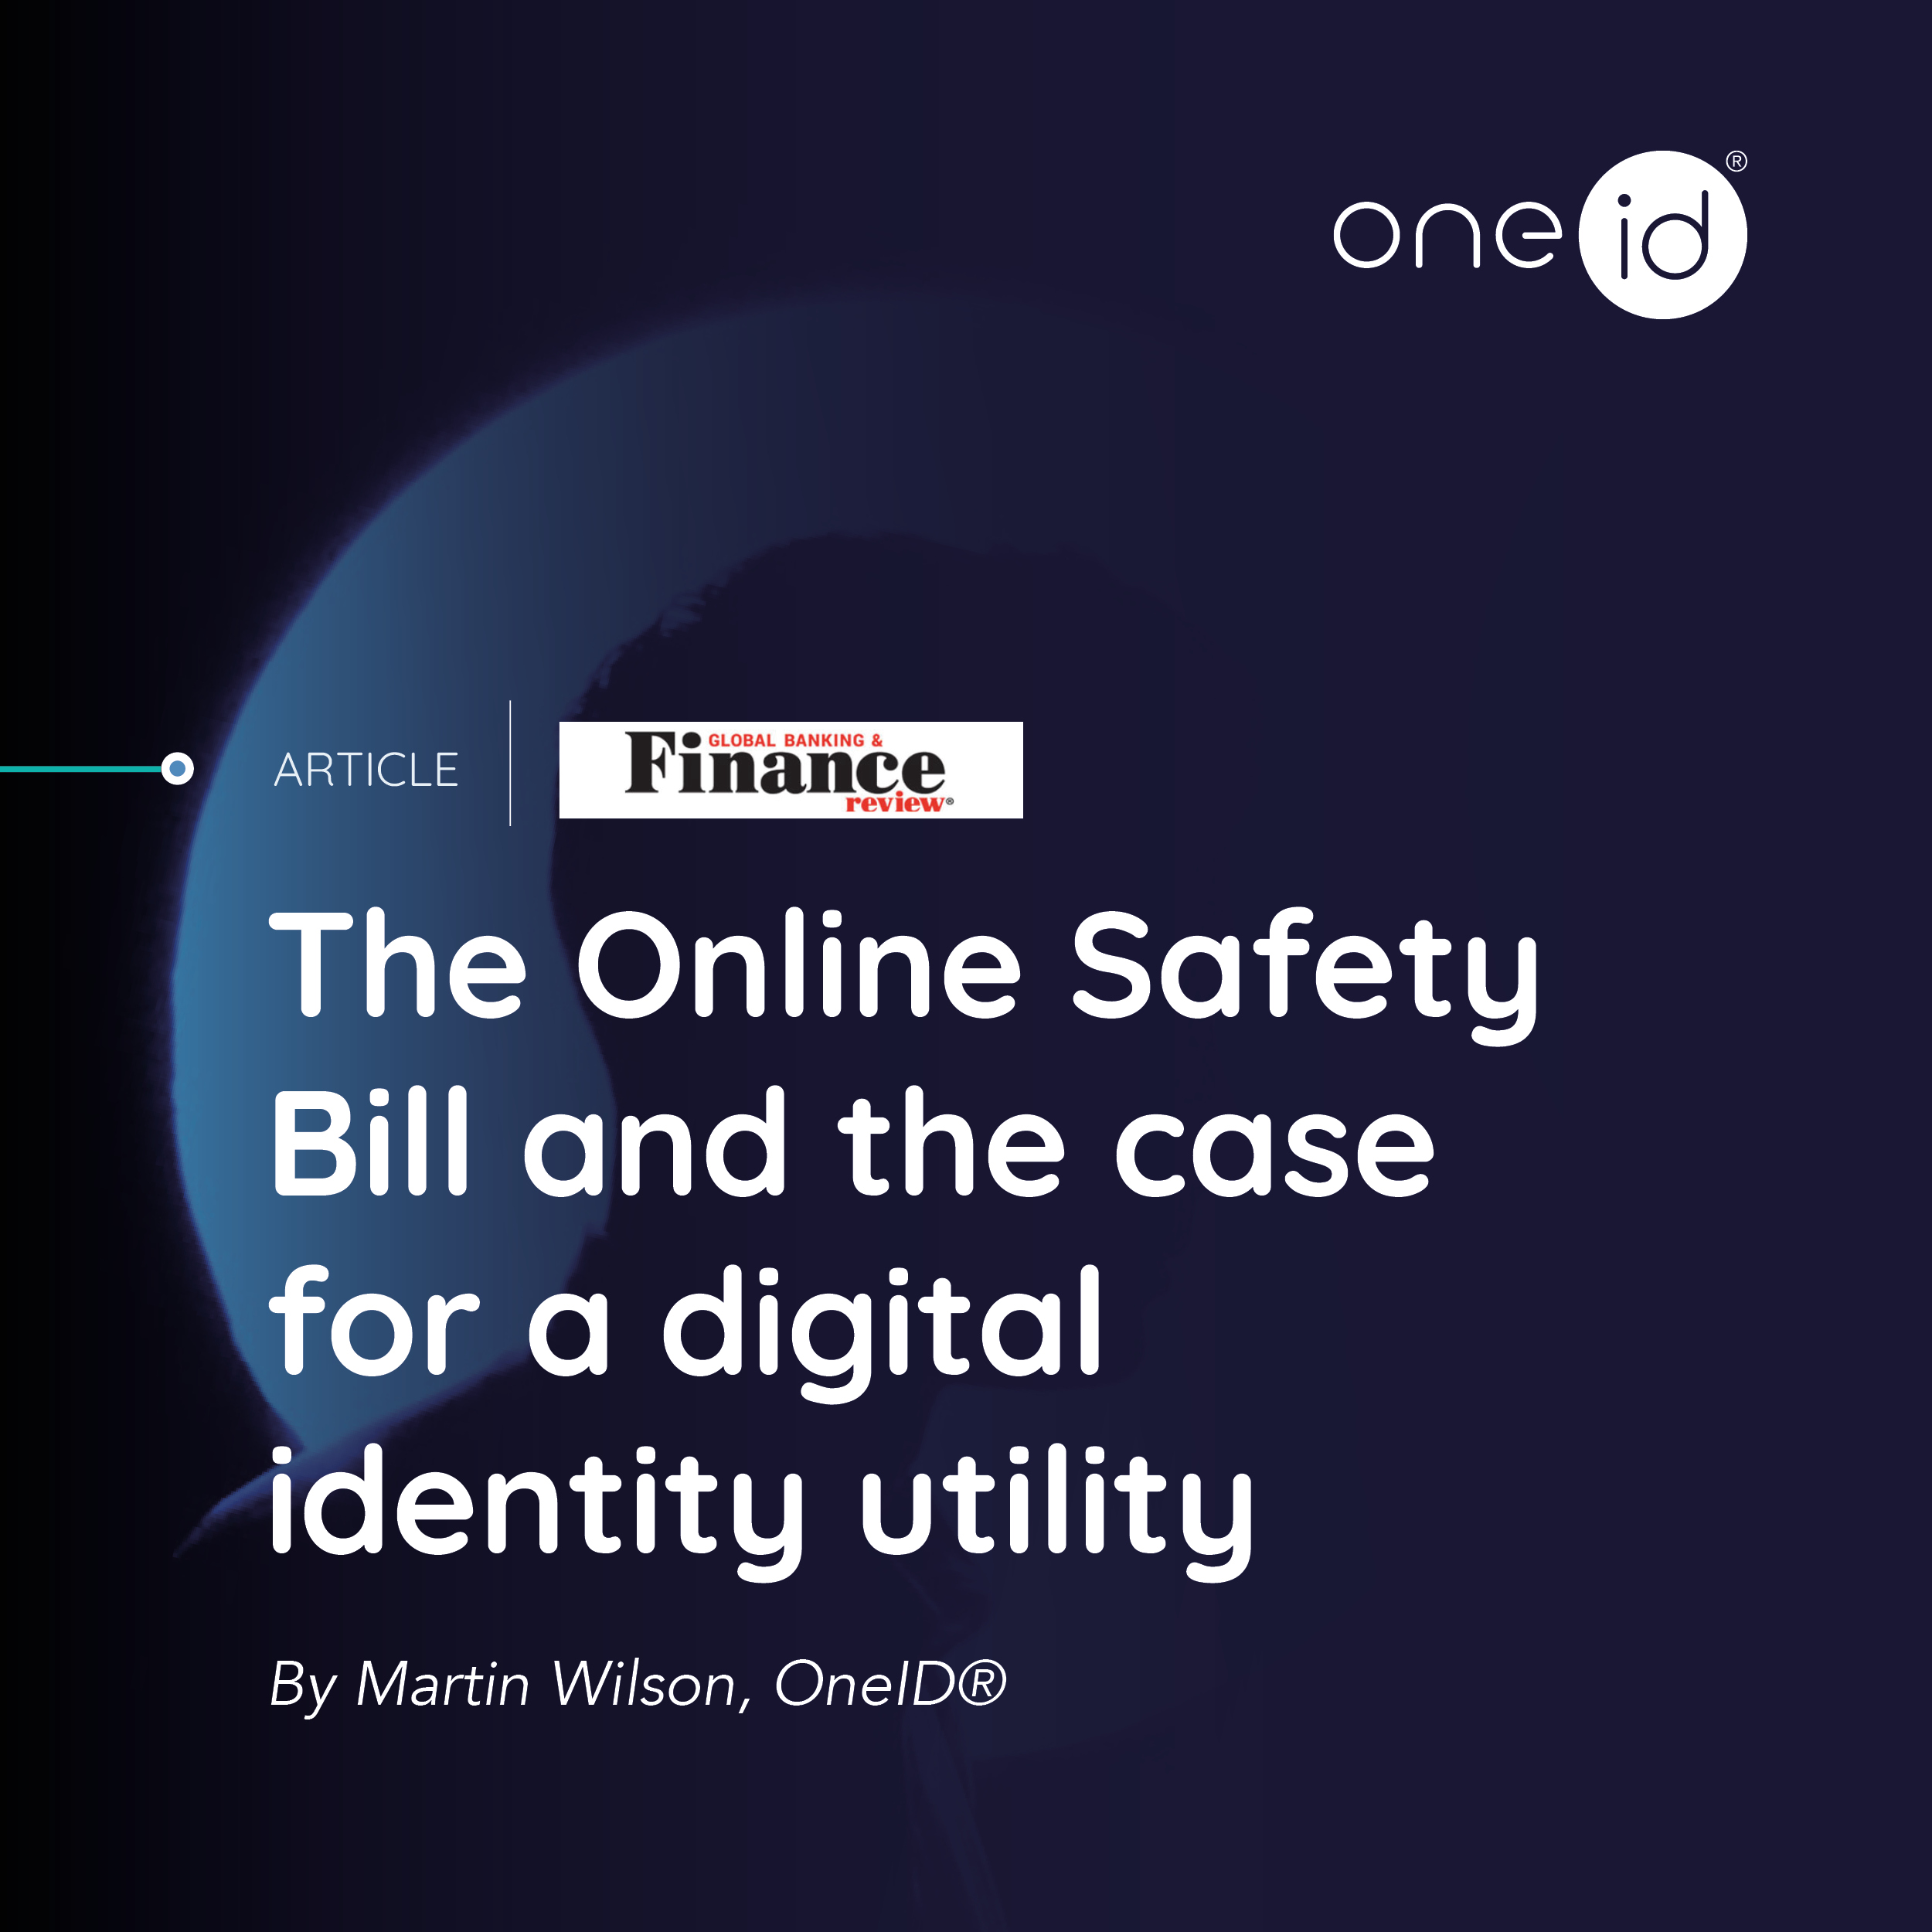 The Online Safety Bill and the case for a digital identity utility